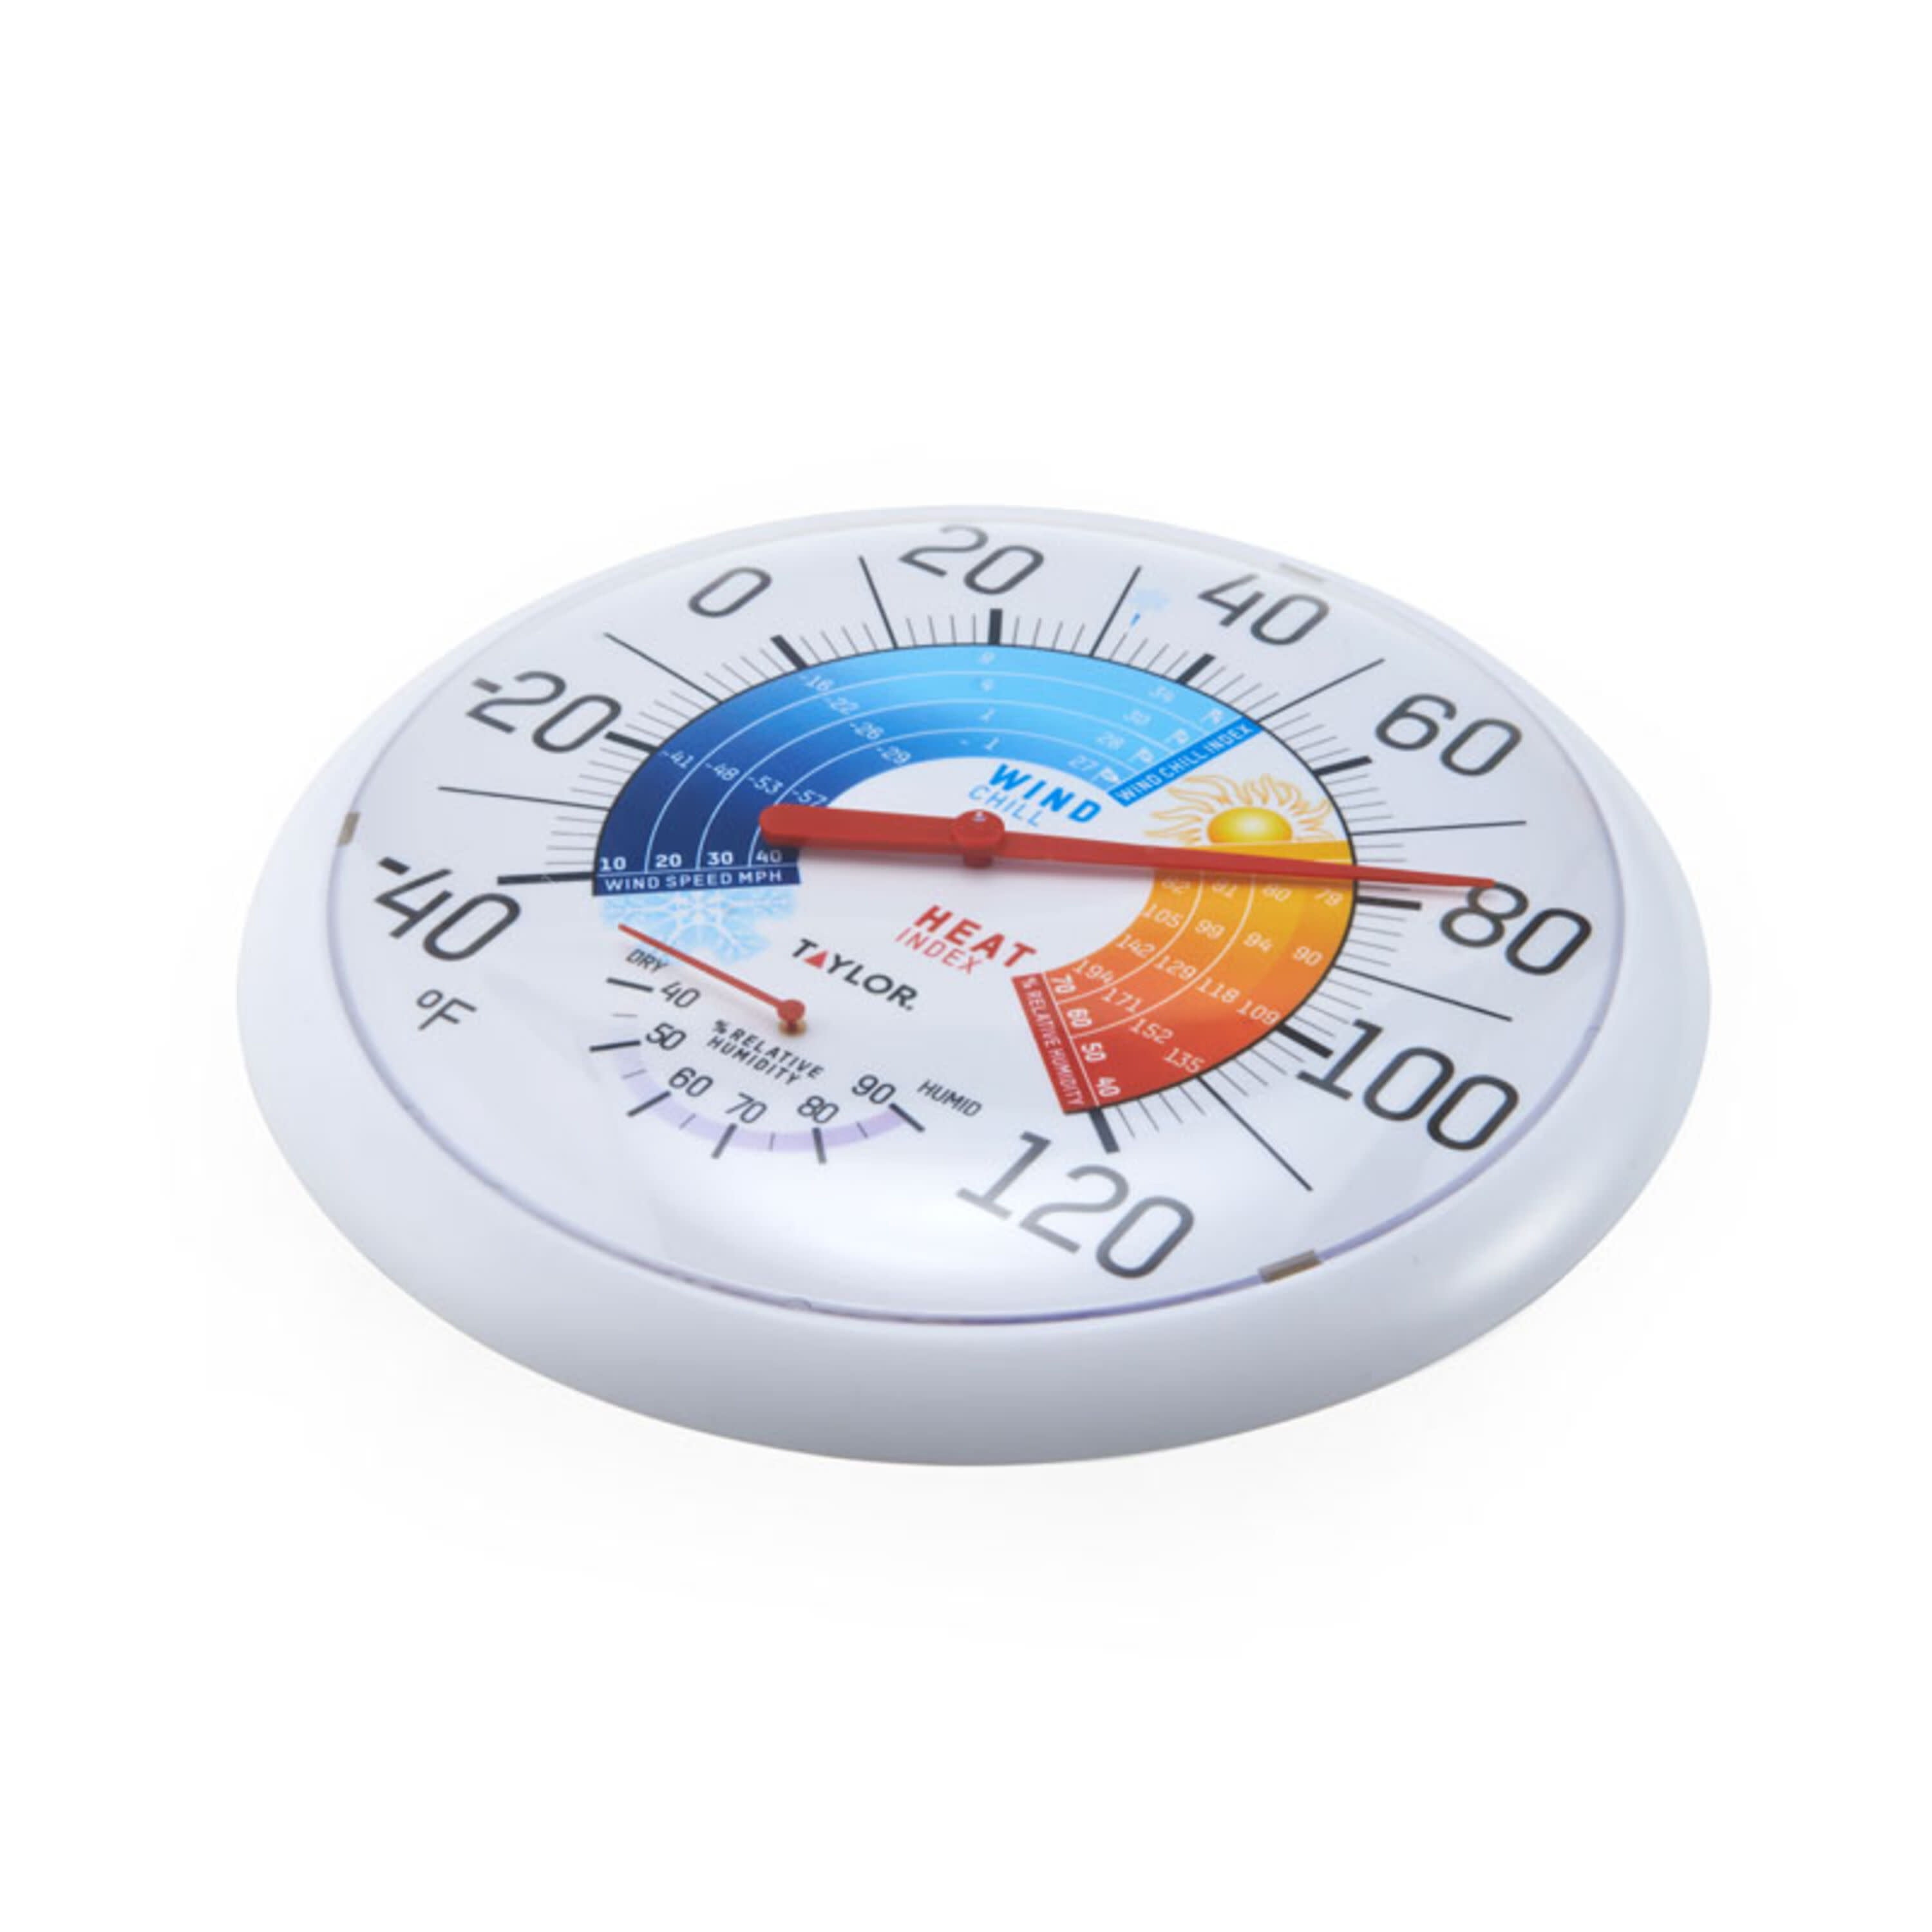 Taylor 5153 7 5/8 Outdoor Window Thermometer